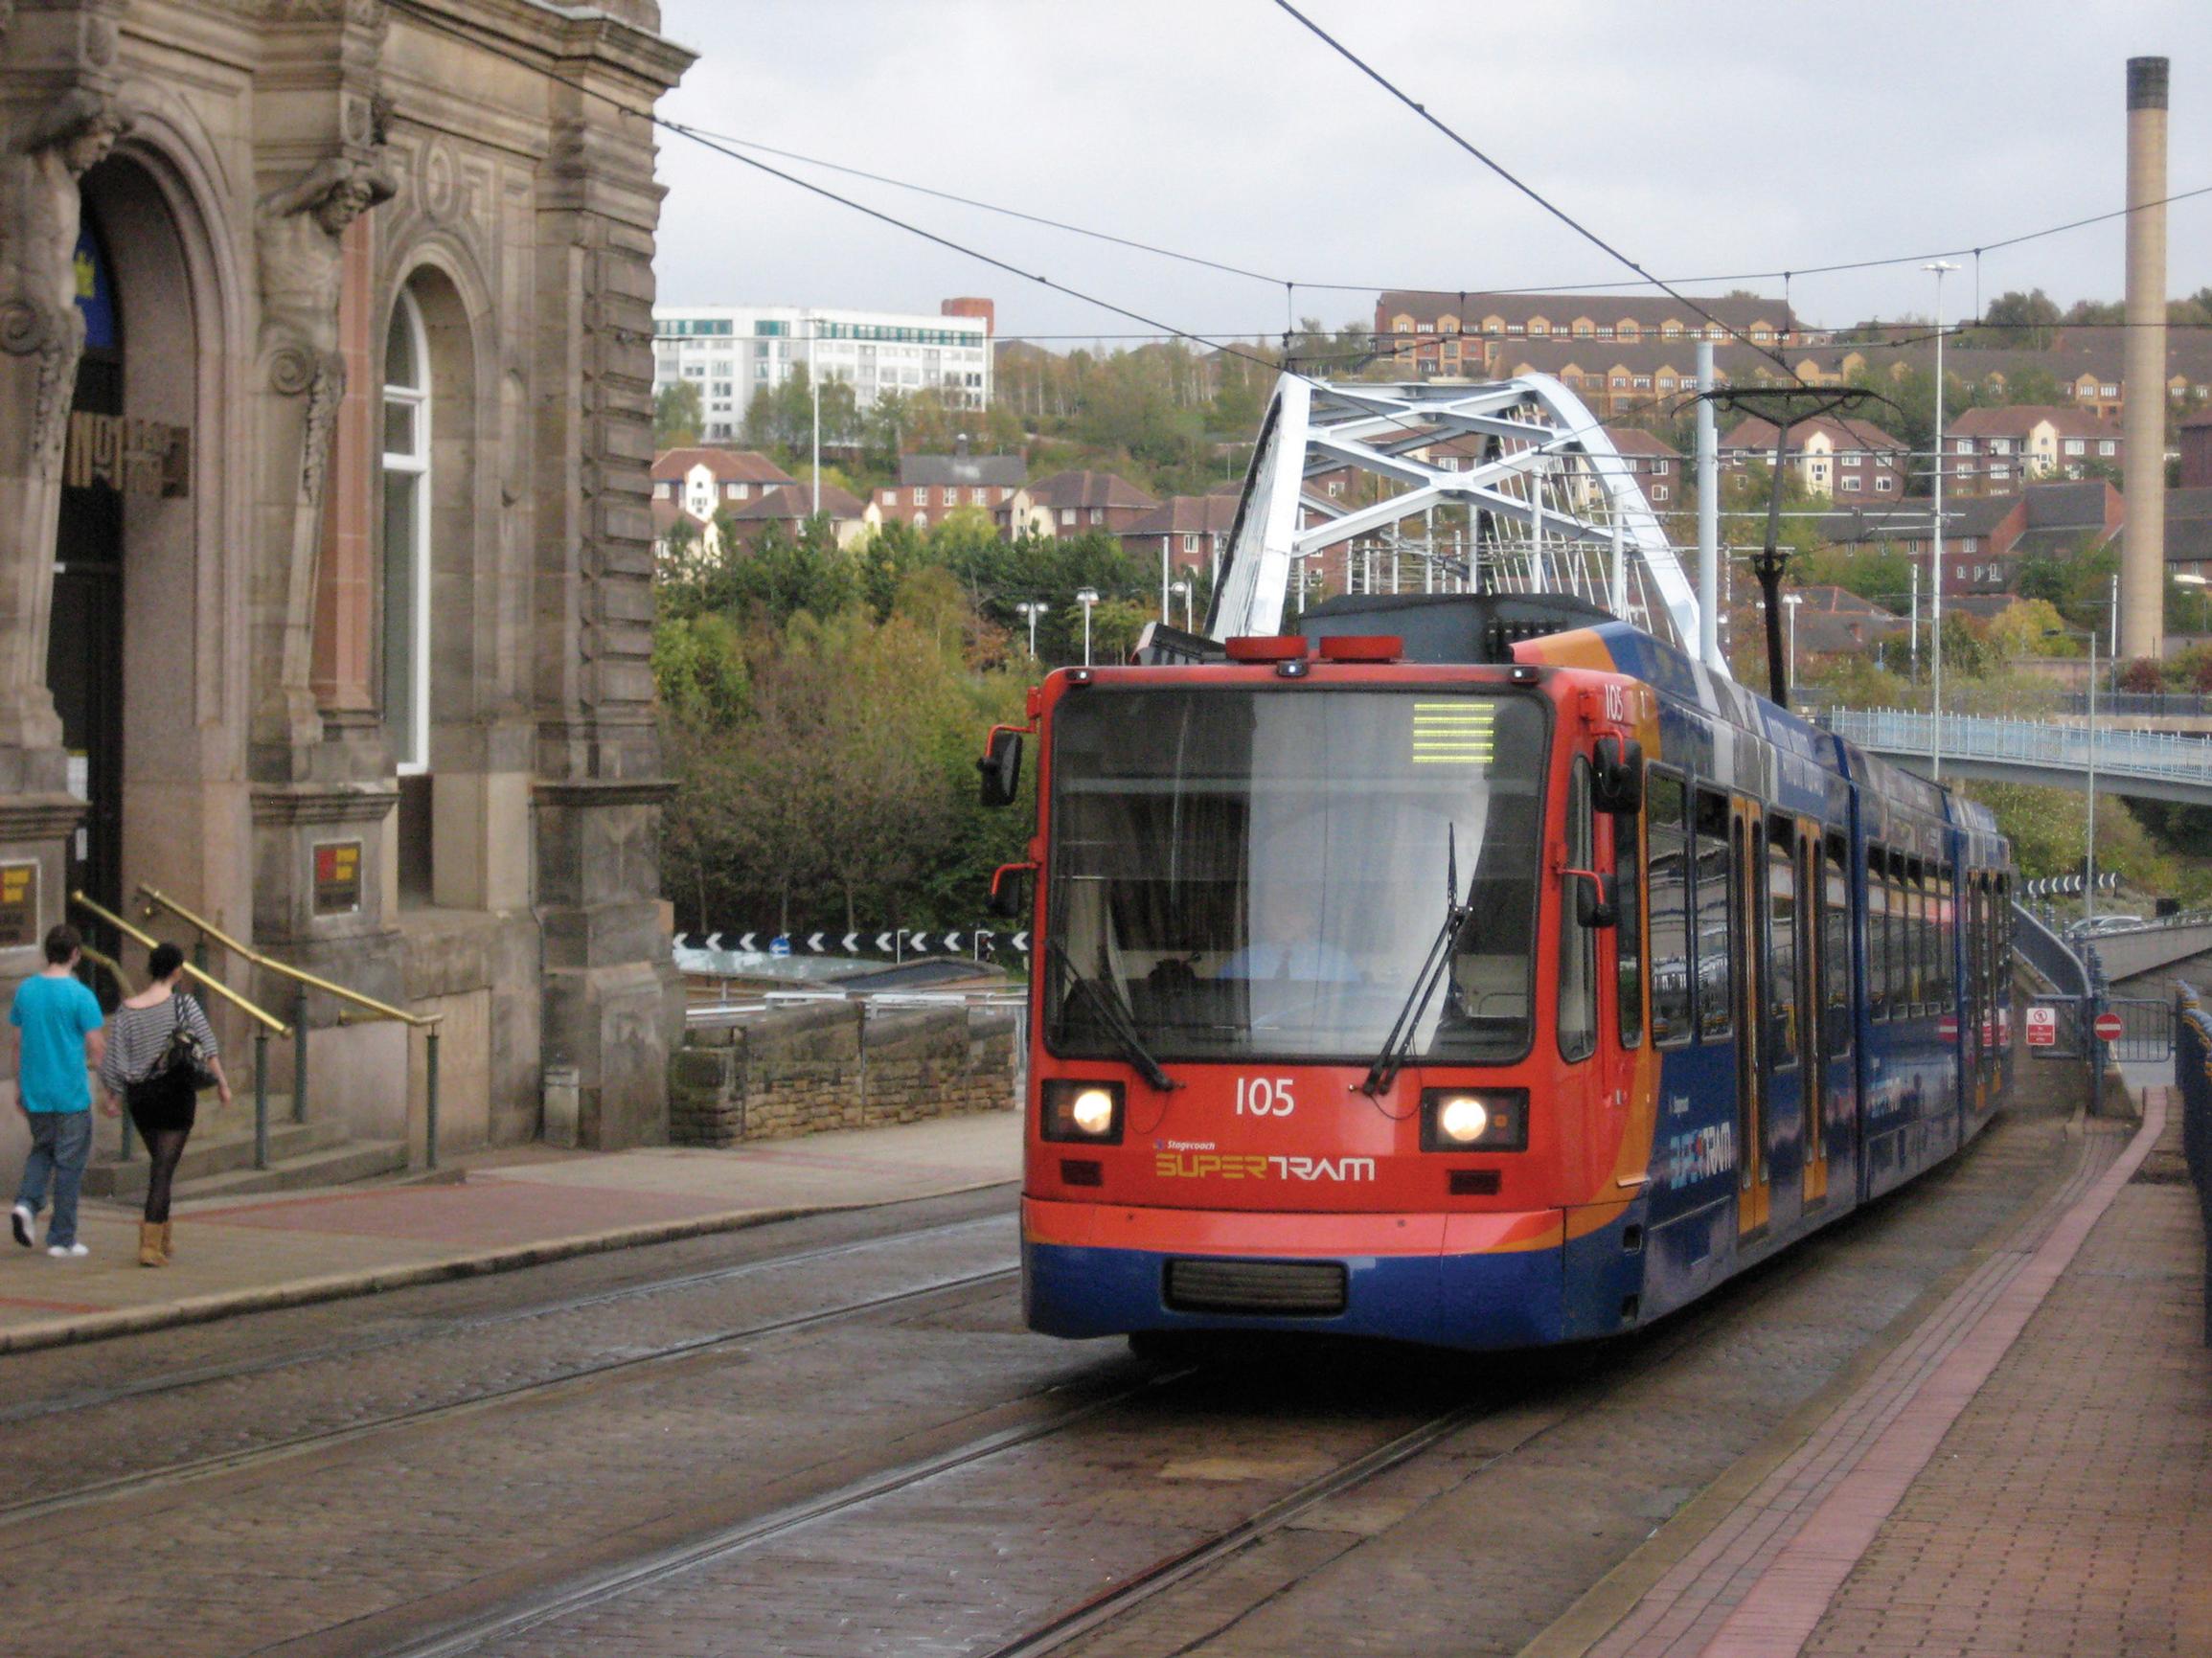 Supertram: about 300 cycle accidents have been reported in the last year